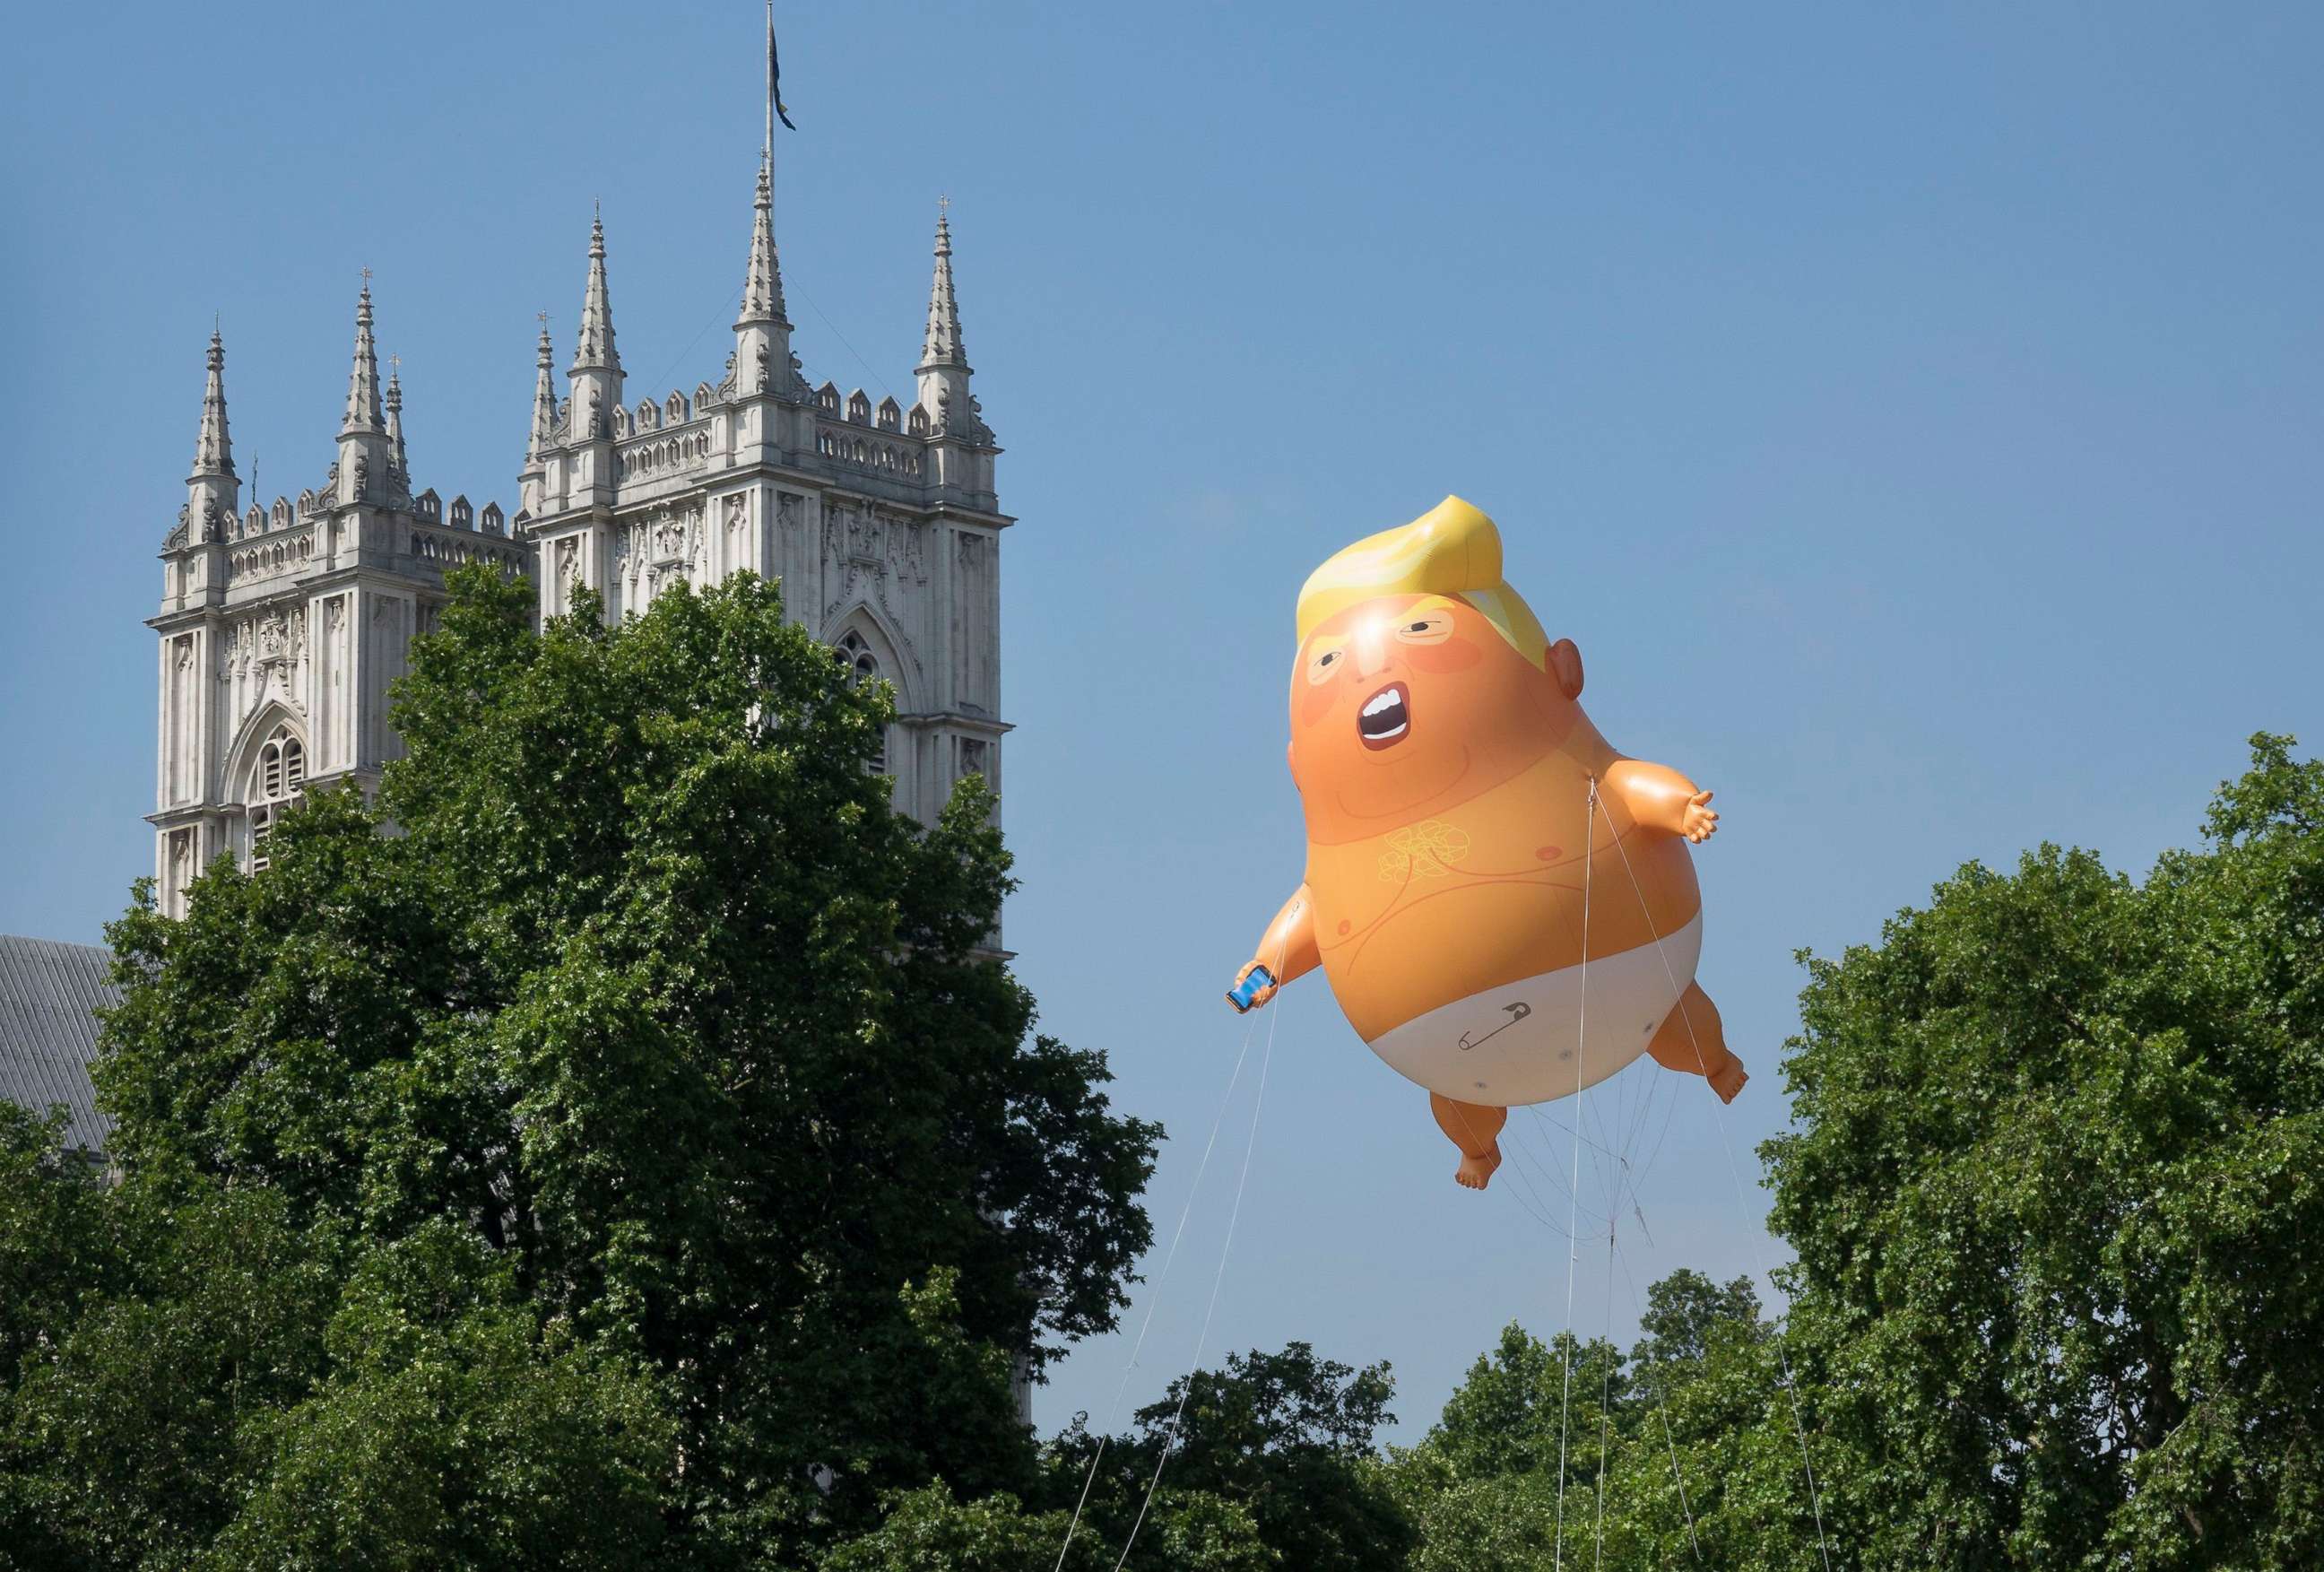 PHOTO: A giant inflatable balloon depicting President Trump as a baby in a nappy is flown over Parliament Square in London, July 13, 2018.